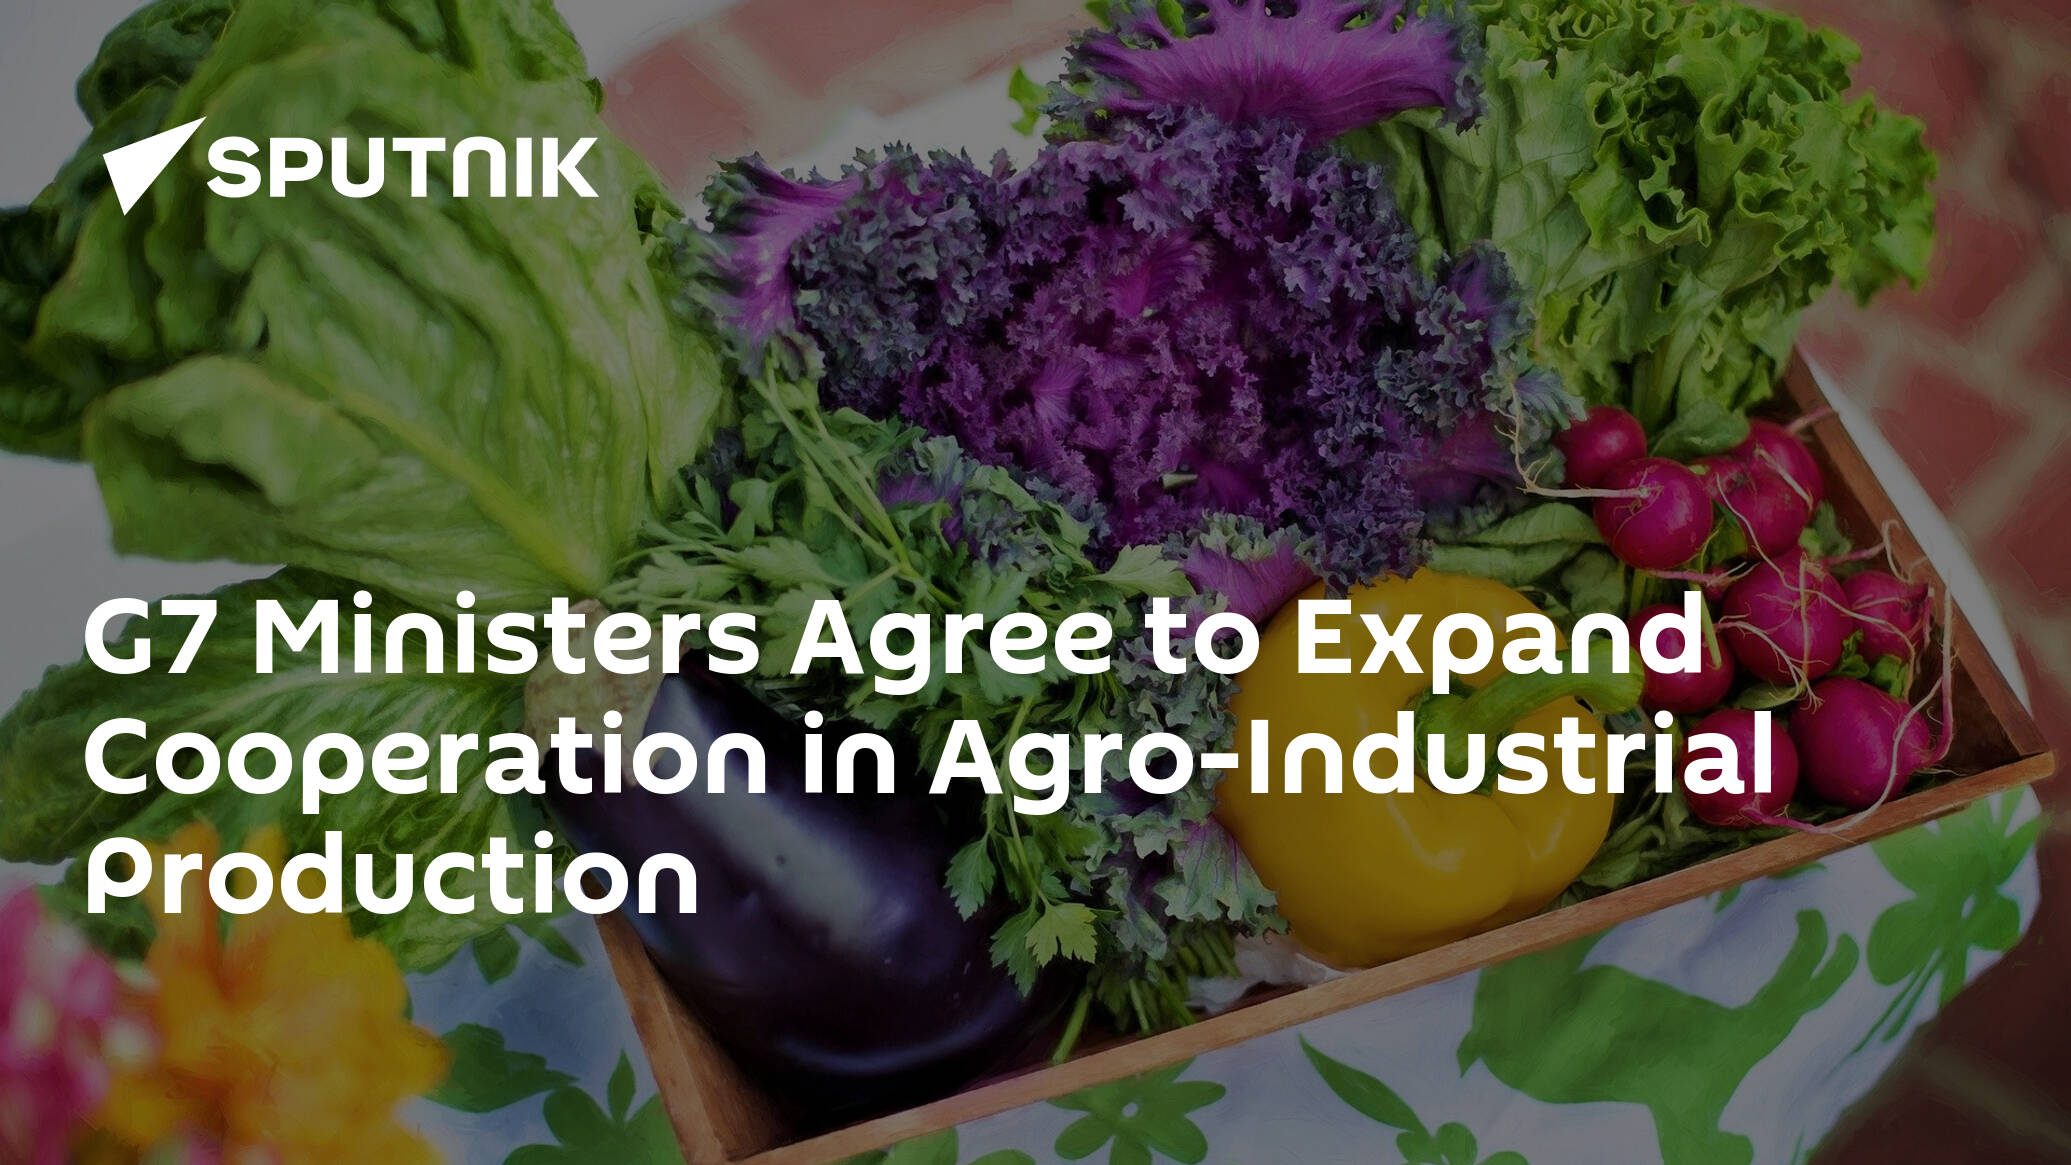 G7 Ministers Agree to Expand Cooperation in Agro-Industrial Production